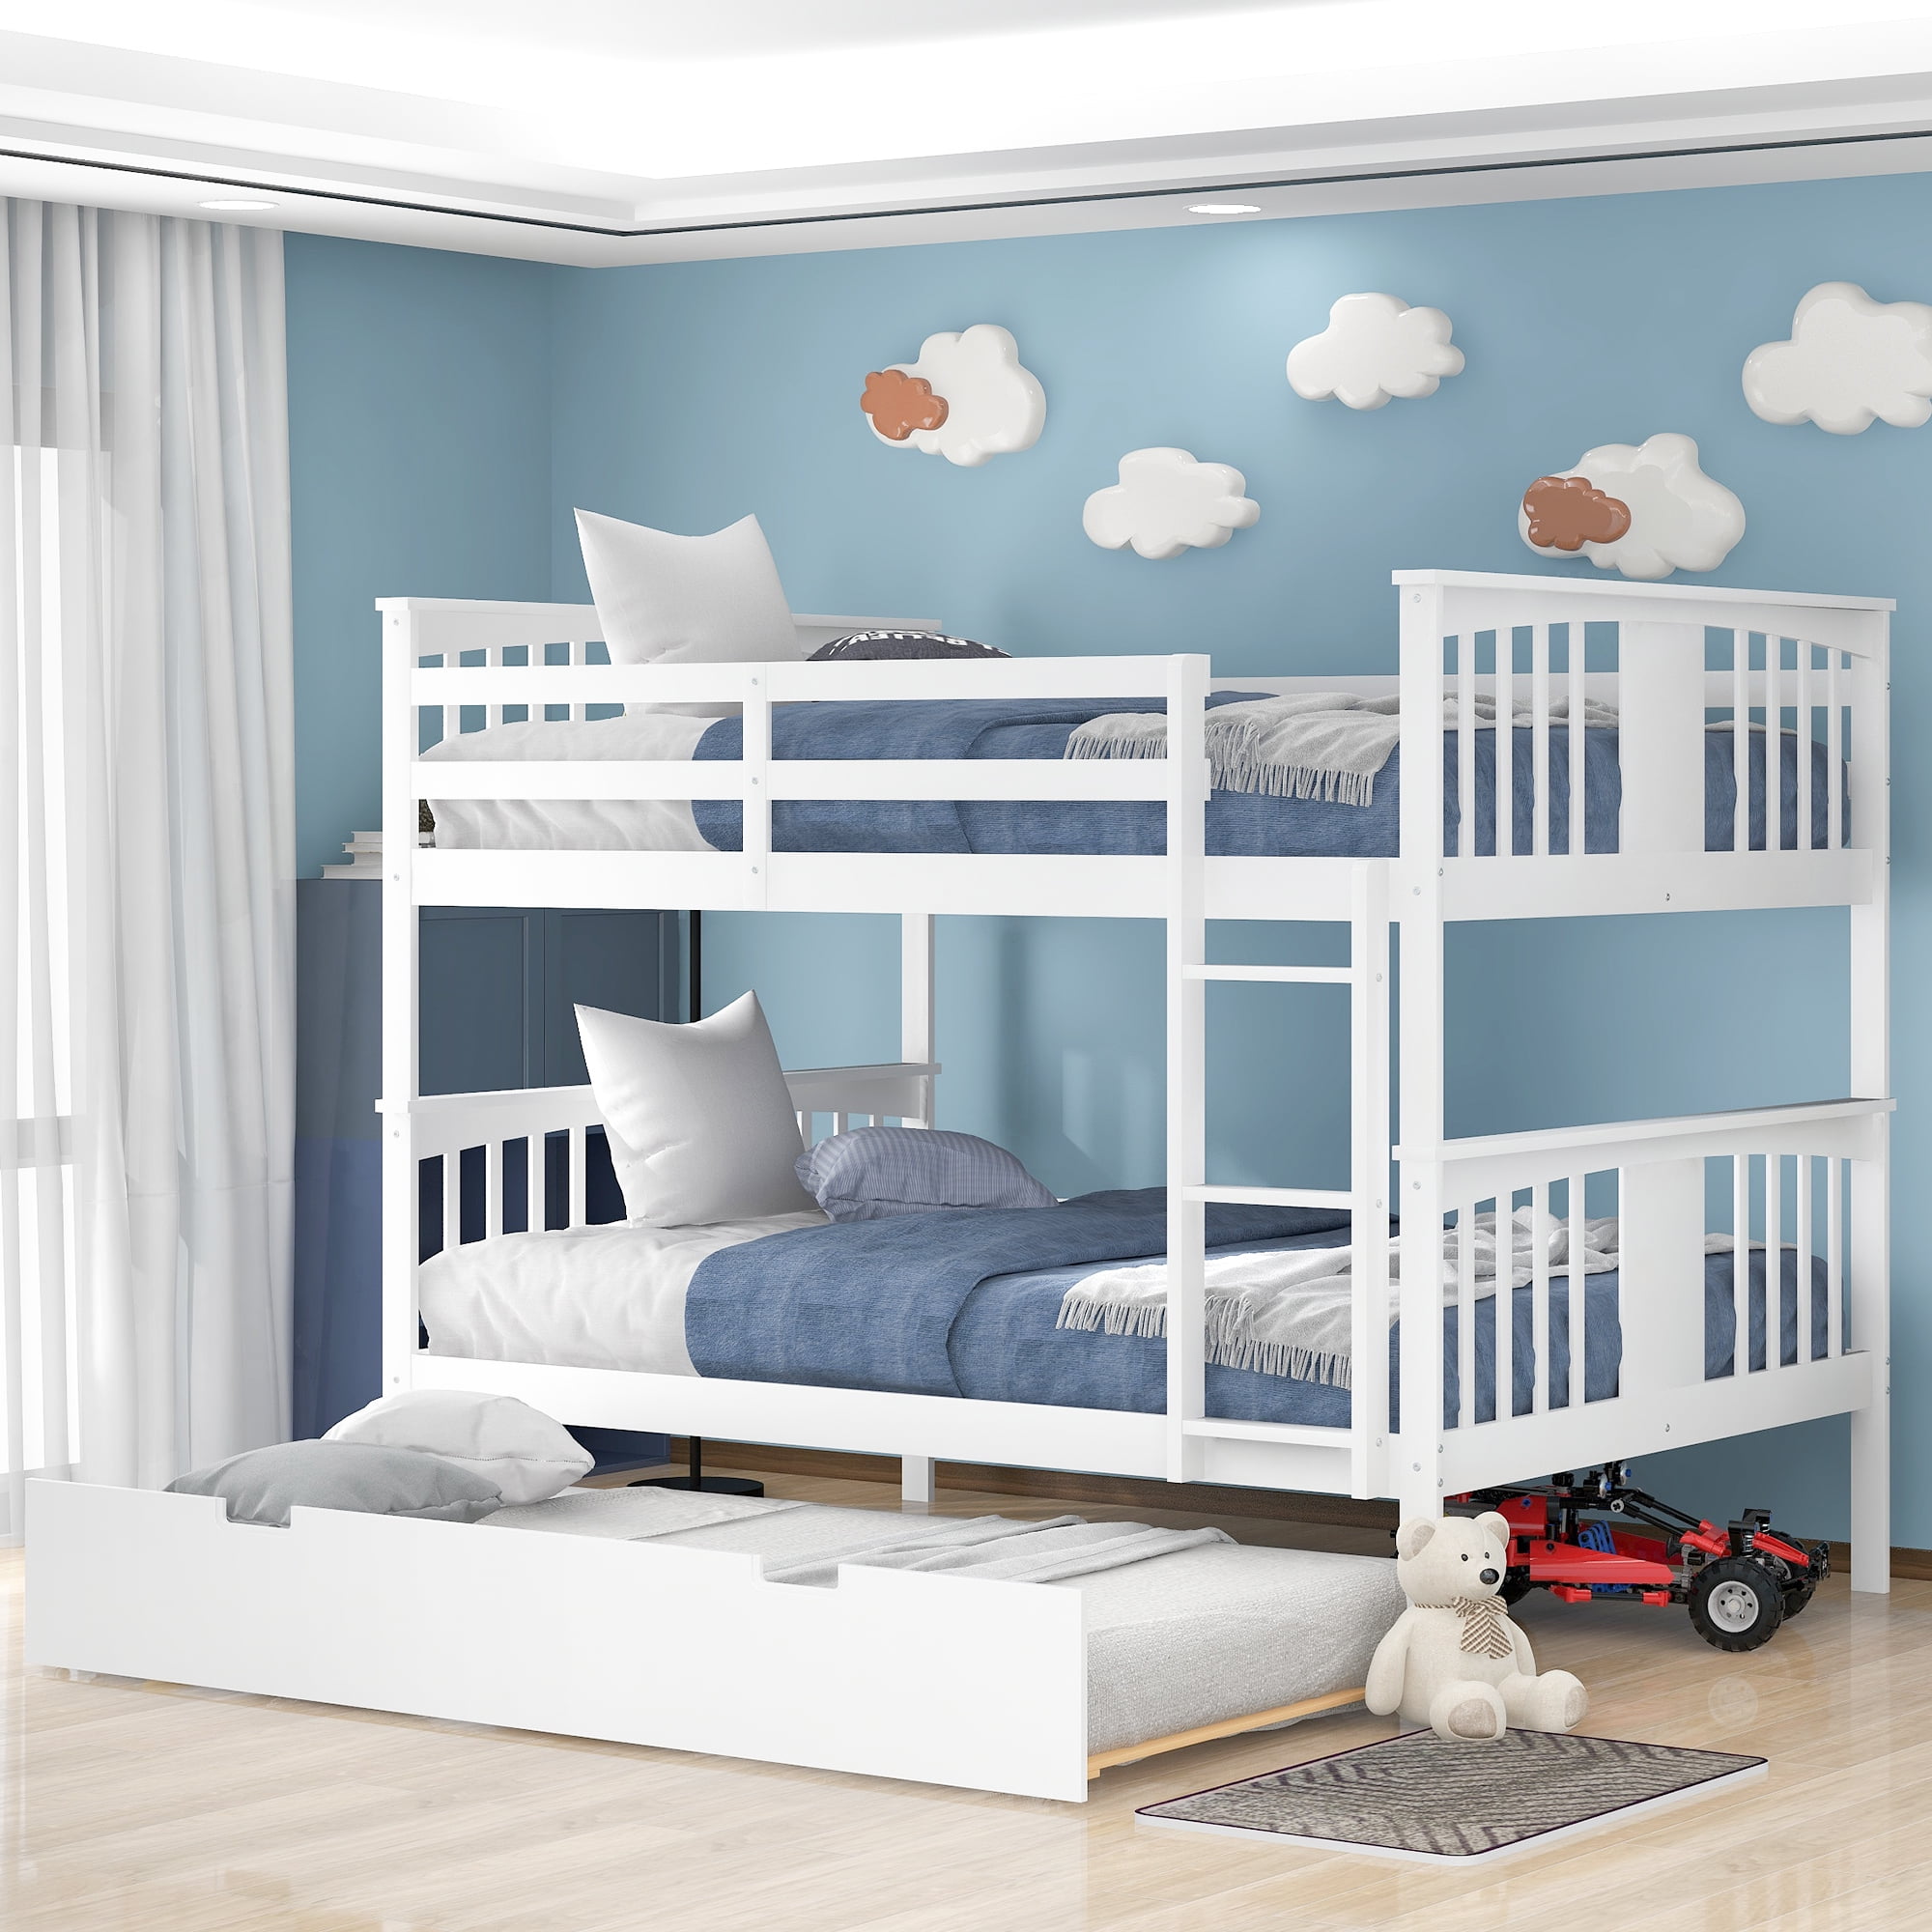 Bedroom Guest Room Furniture, Shyann Twin Over Full Bunk Bed With Trundle